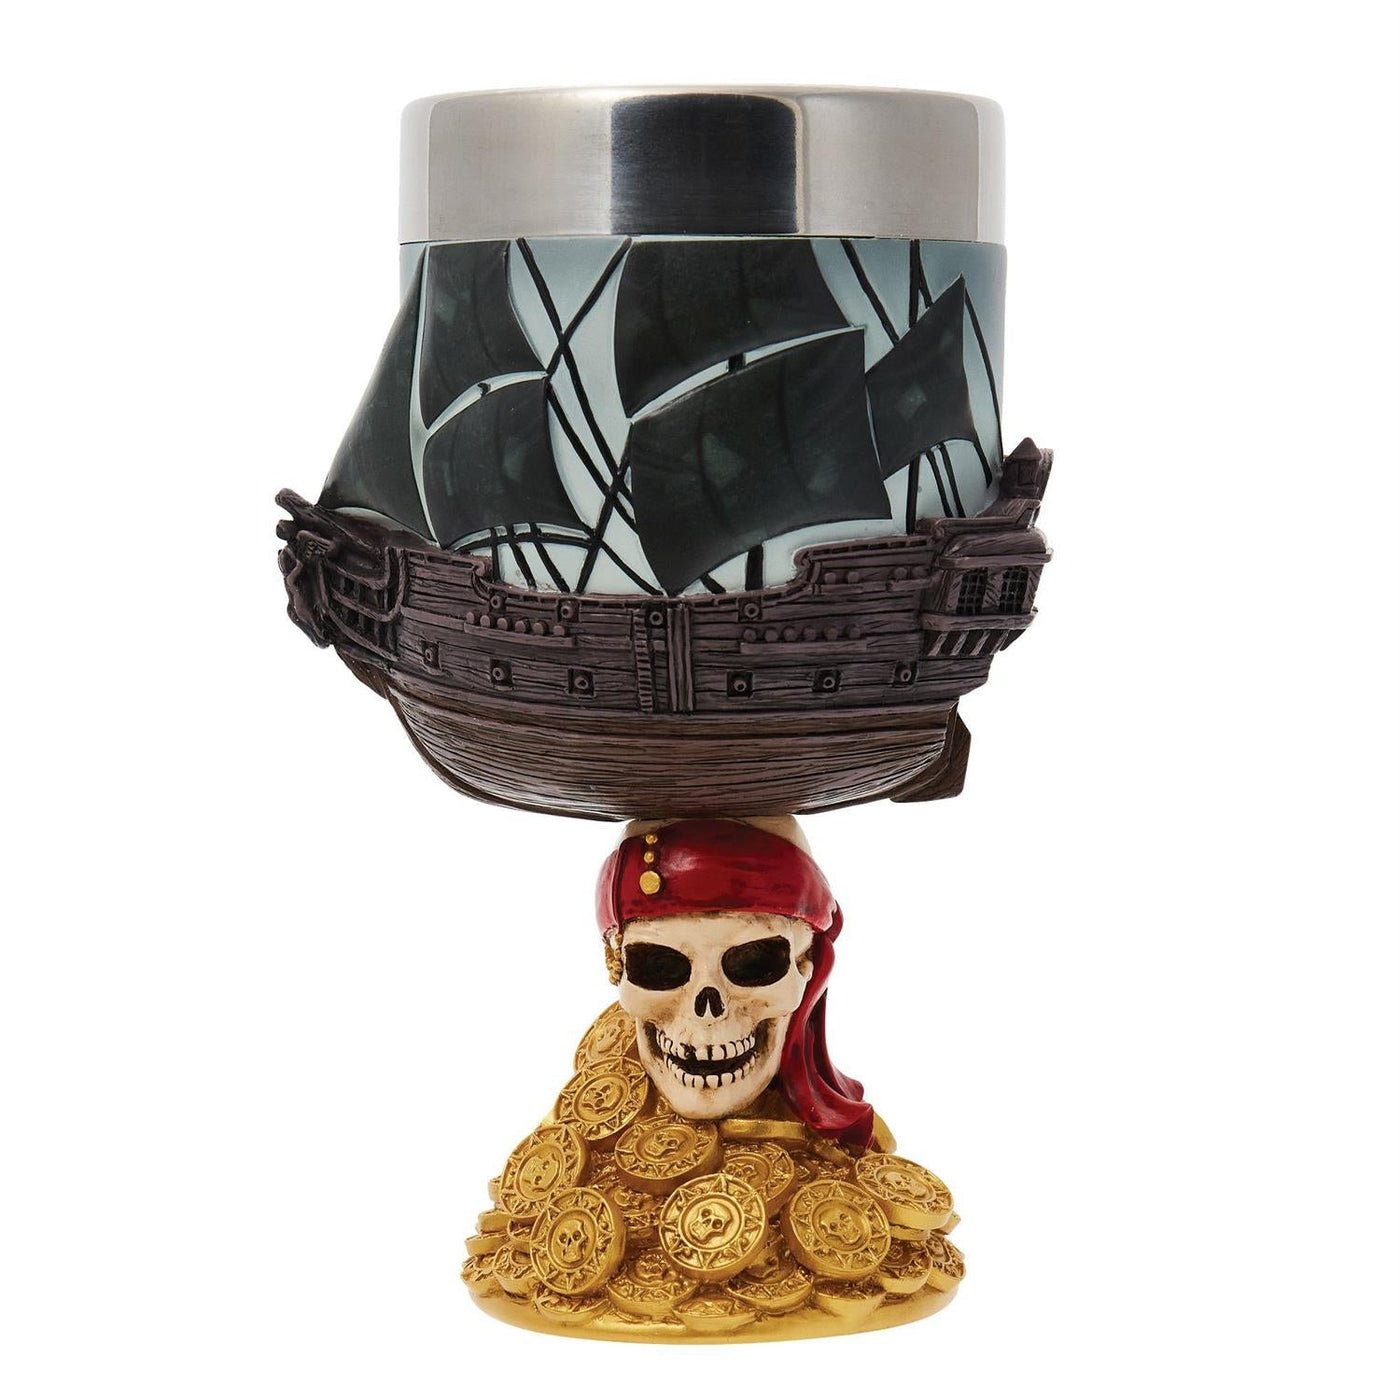 Pirates of the Caribbean Goblet 7" - Official Disney Licensed